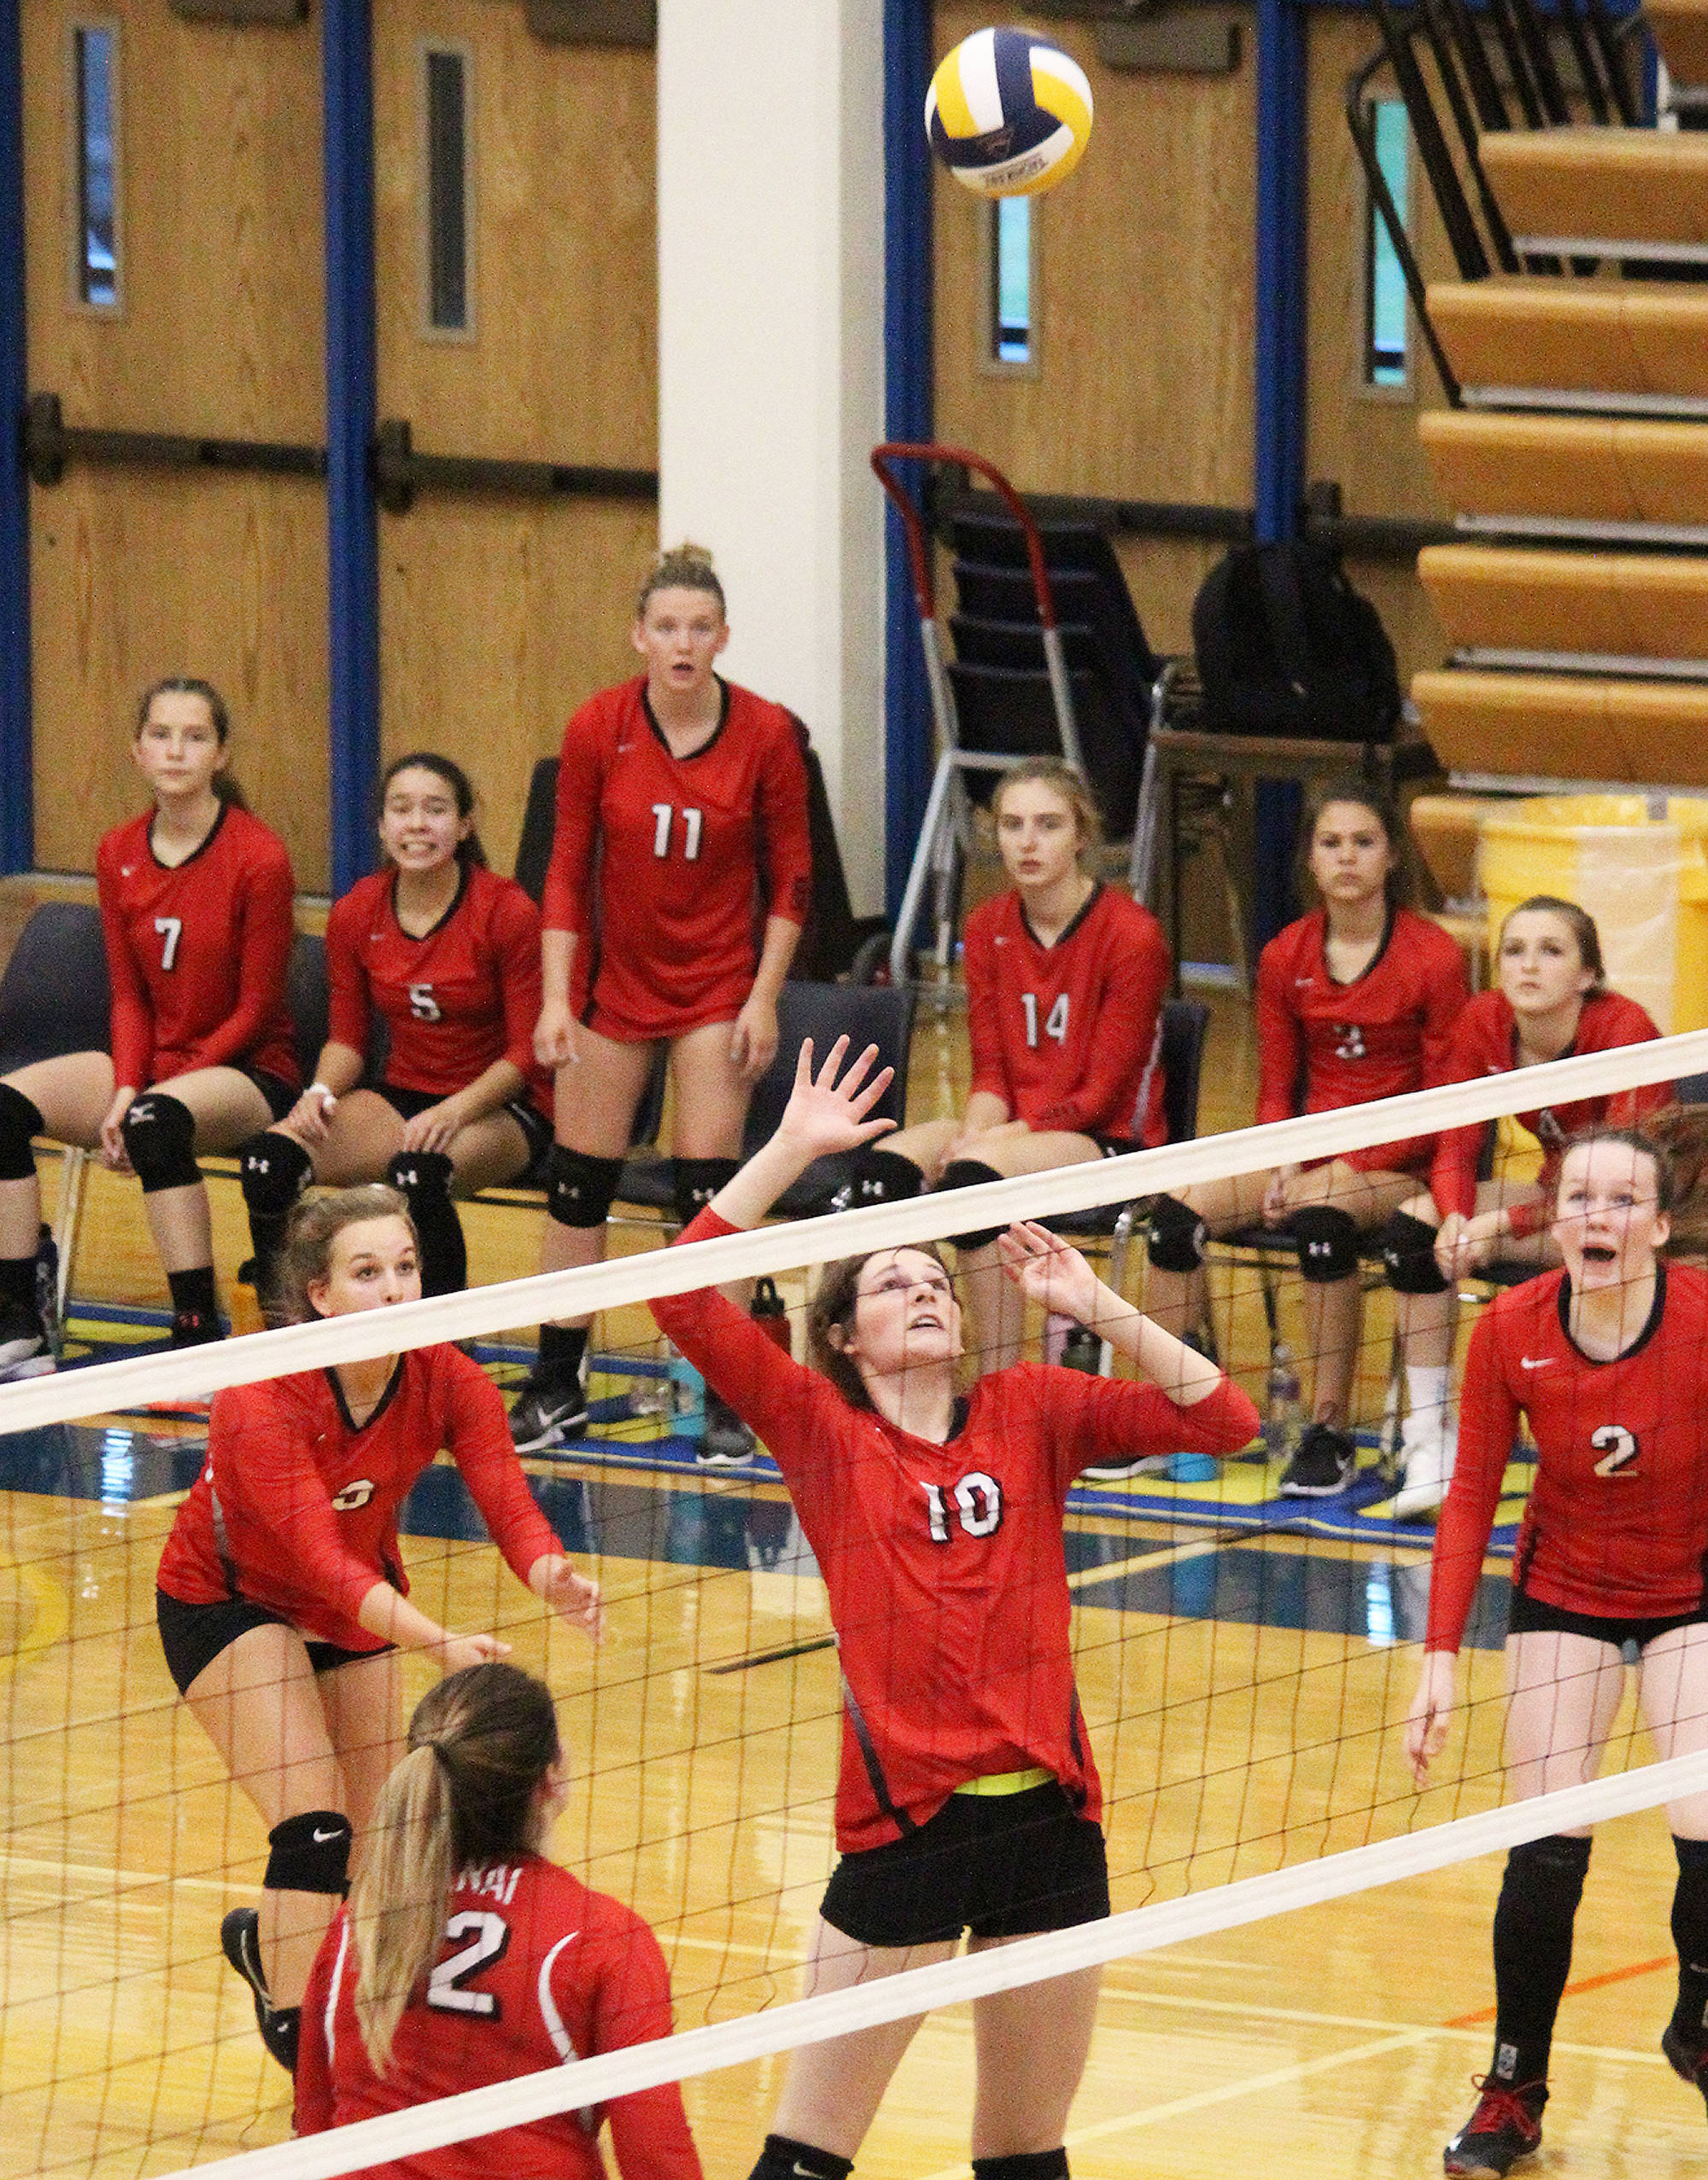 Kenai sophomore Abby Every prepares to spike the ball during a game against Homer High School on Thursday, Sept. 13, 2018 at the school in Homer, Alaska. The Mariners beat the Kardinals three games to one. (Photo by Megan Pacer/Homer News)